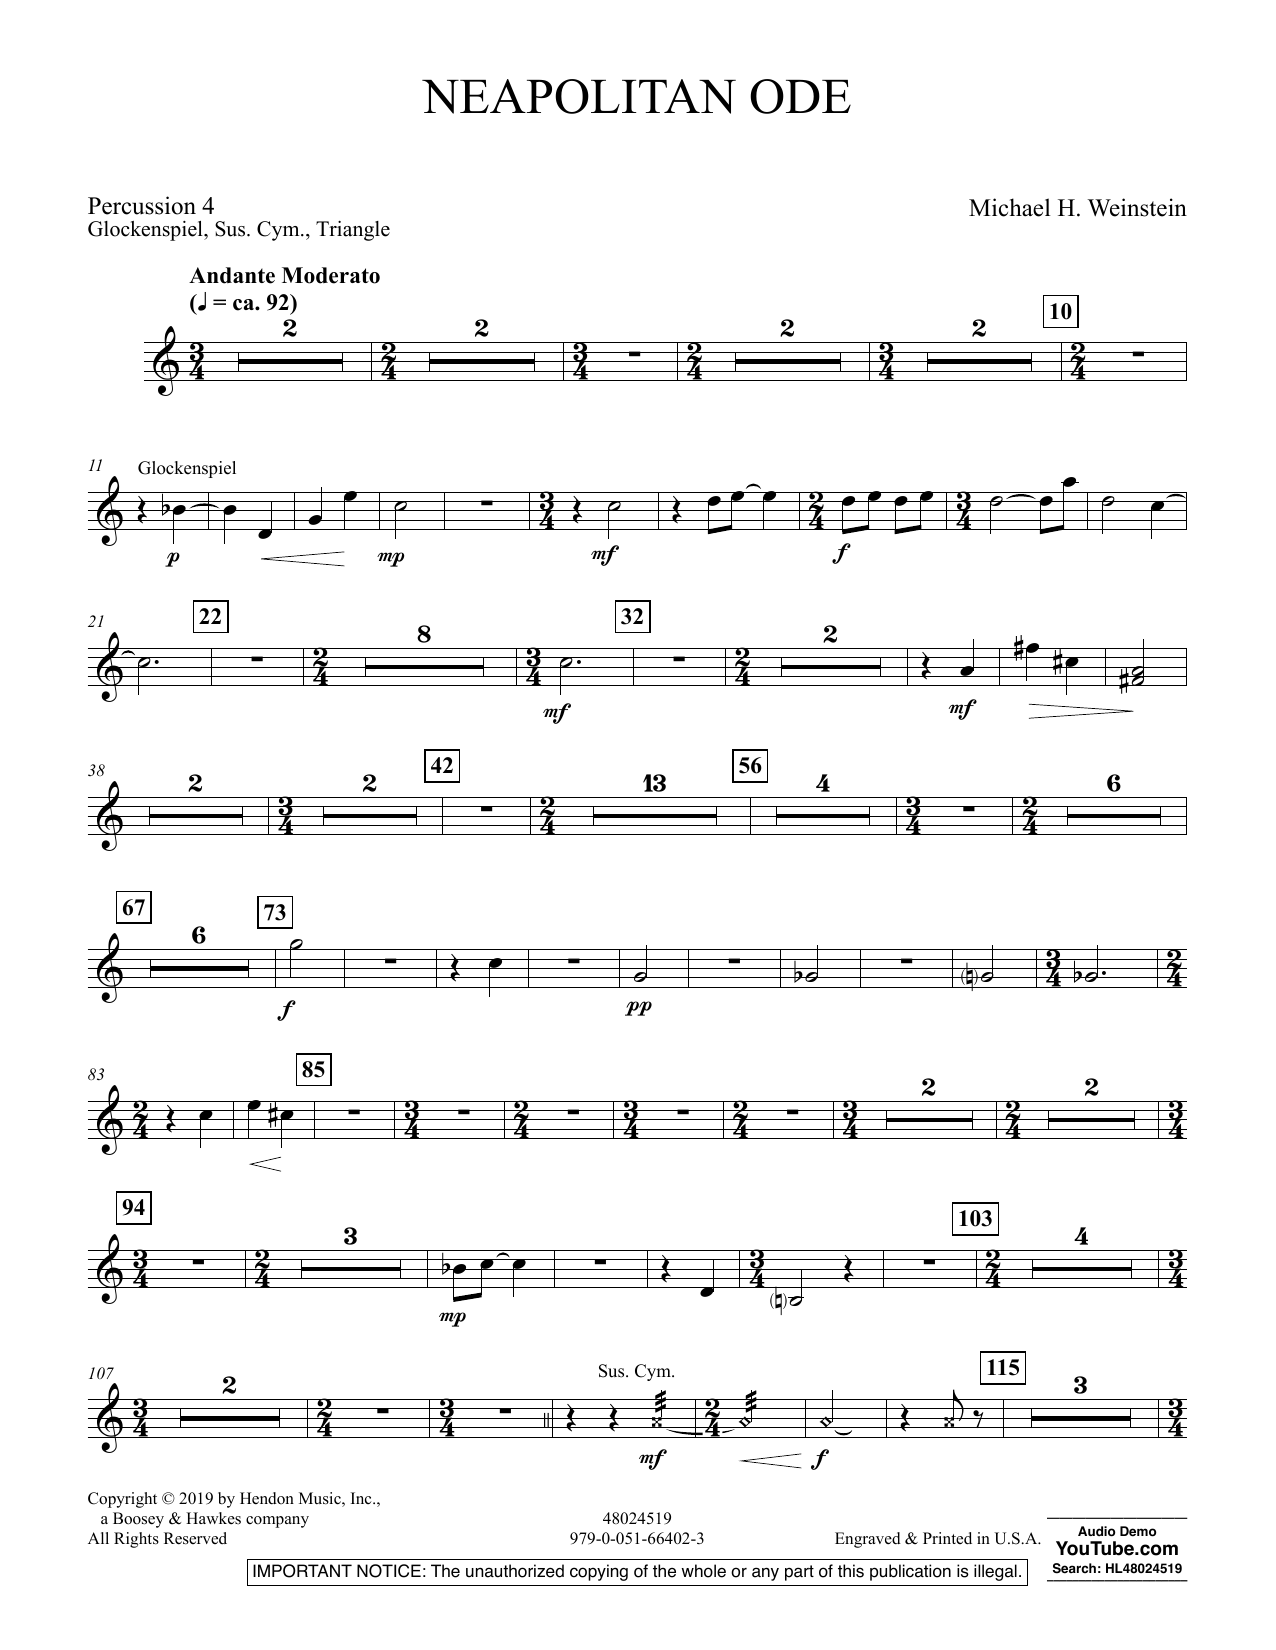 Michael H. Weinstein Neapolitan Ode - Percussion 4 sheet music preview music notes and score for Concert Band including 2 page(s)